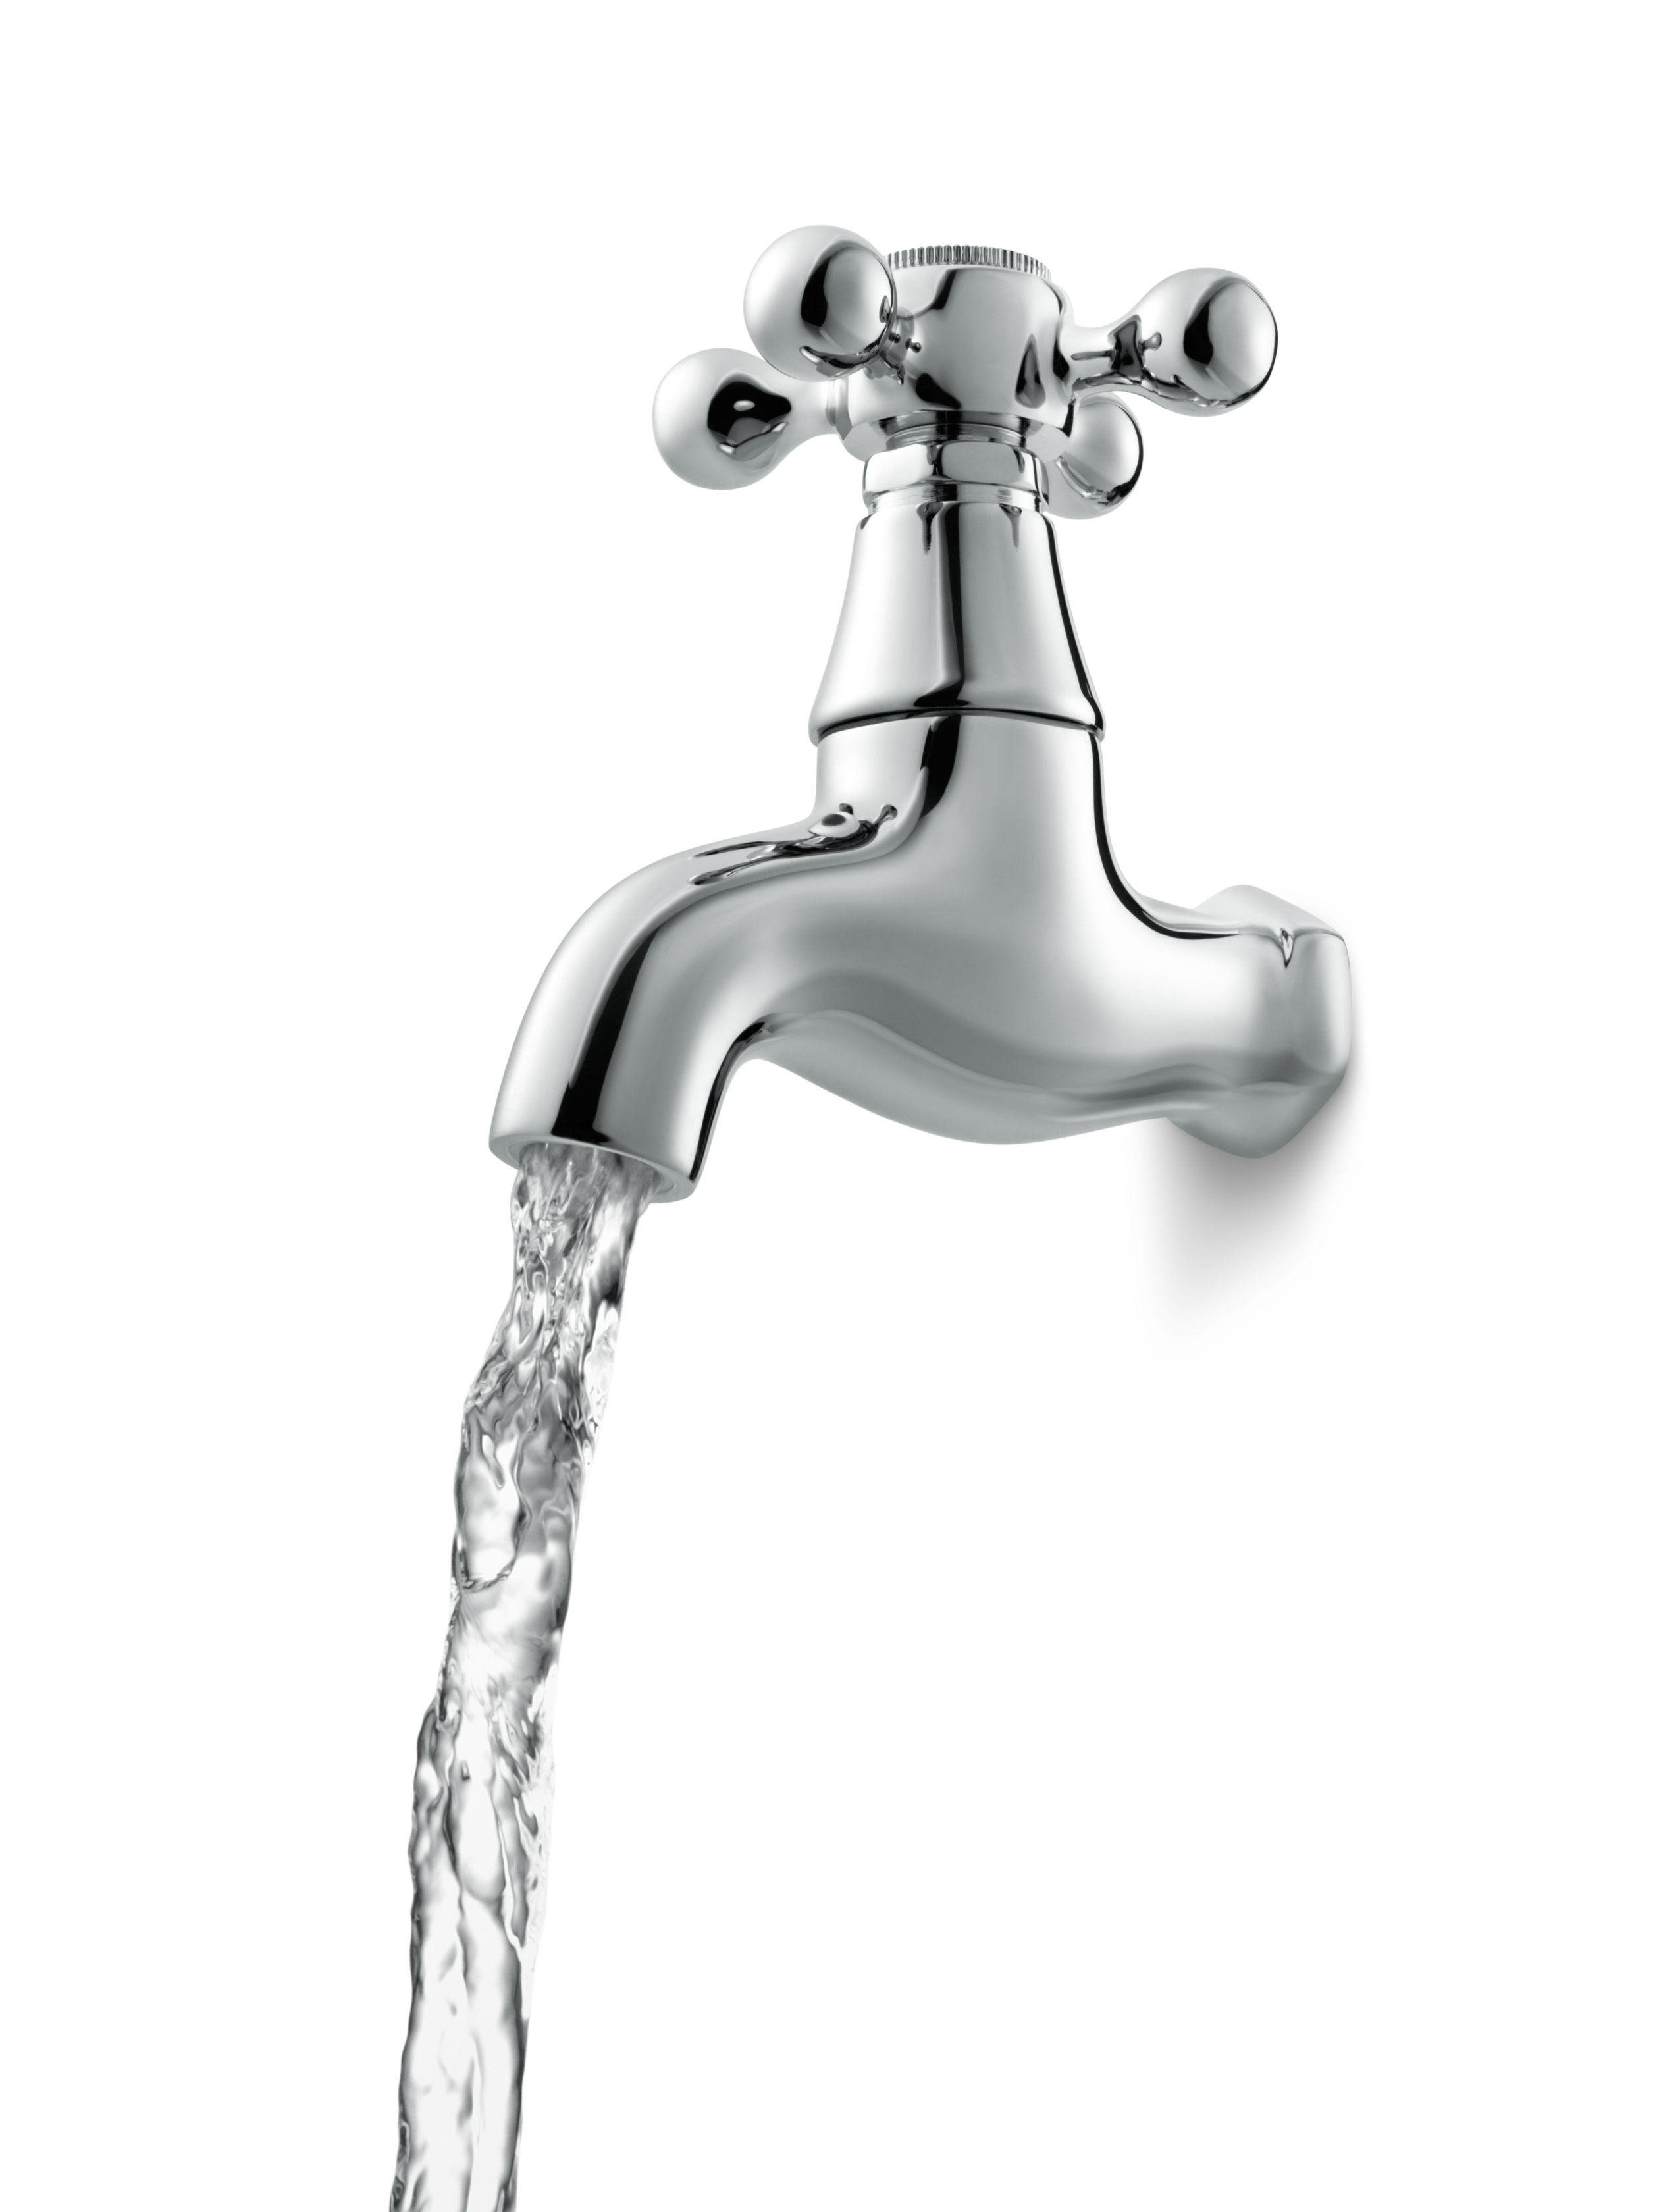 Water Faucet Png Transparent Water Faucet Png Images Pluspng